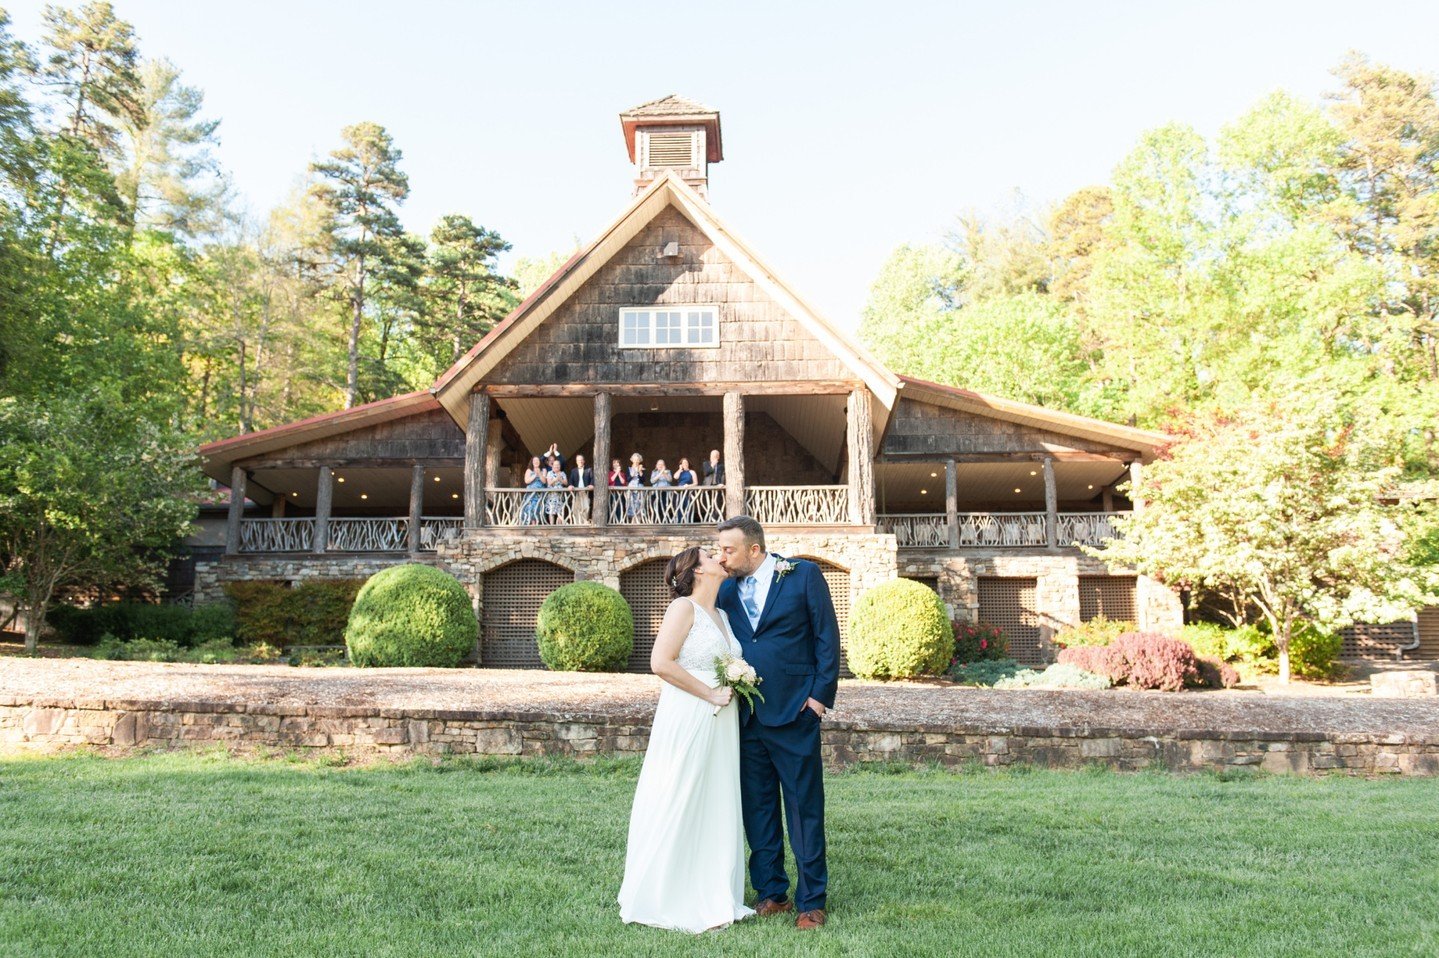 Happy 1st Anniversary!  I can't believe it's been a year since you said your I do's on the front porch of the dining hall at Camp Greystone...what a sweet wedding it was, and such a special place for everyone involved!  May your future together be as